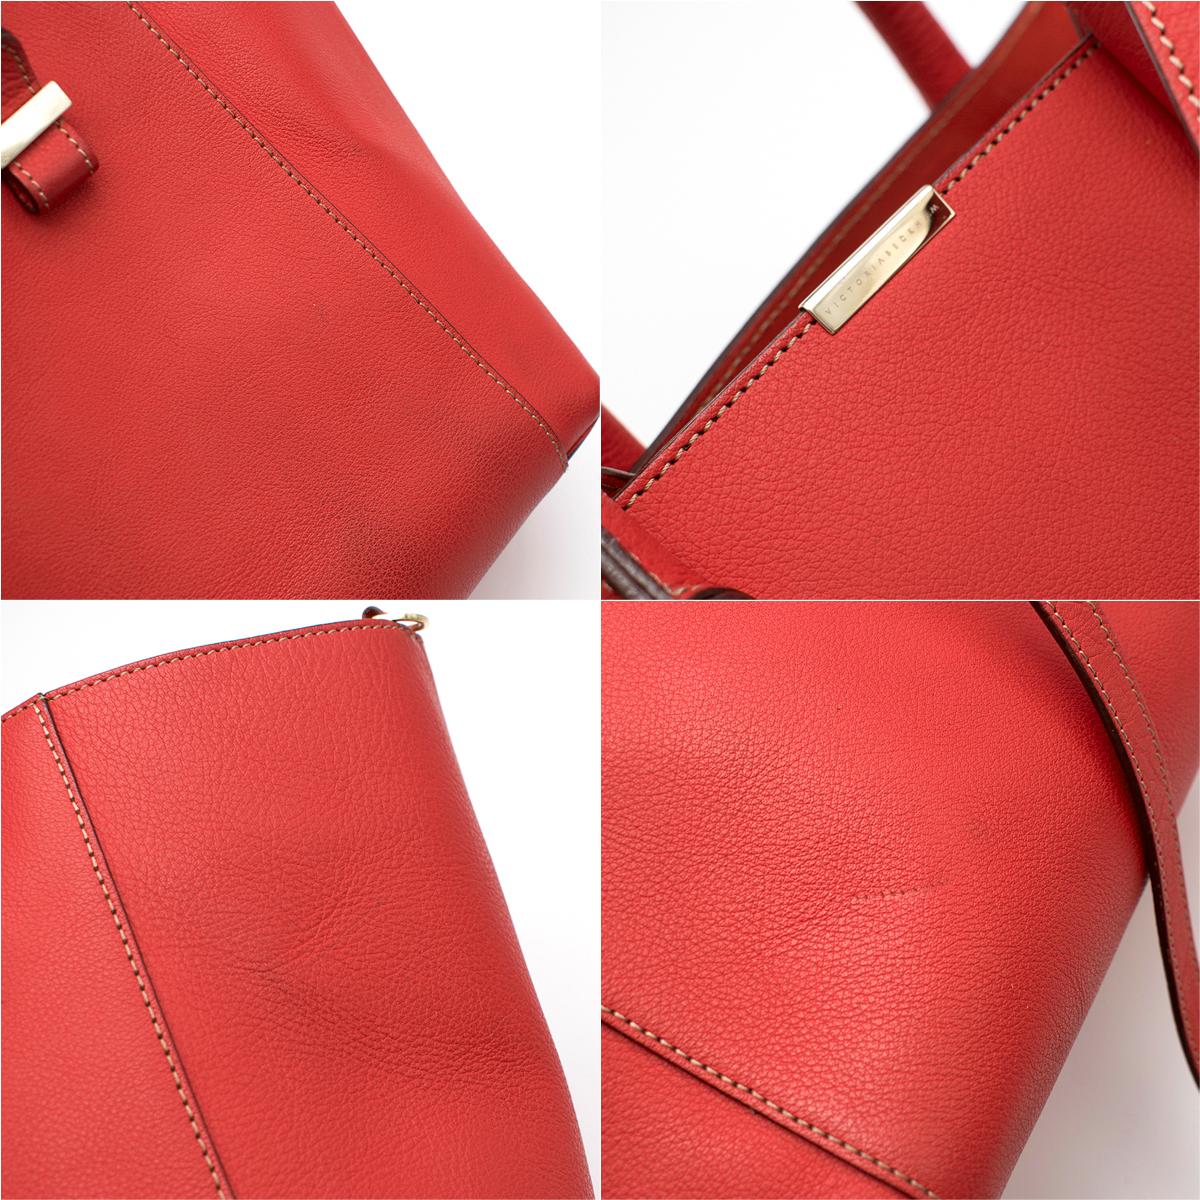 Victoria Beckham Red Liberty Leather Tote bag   3